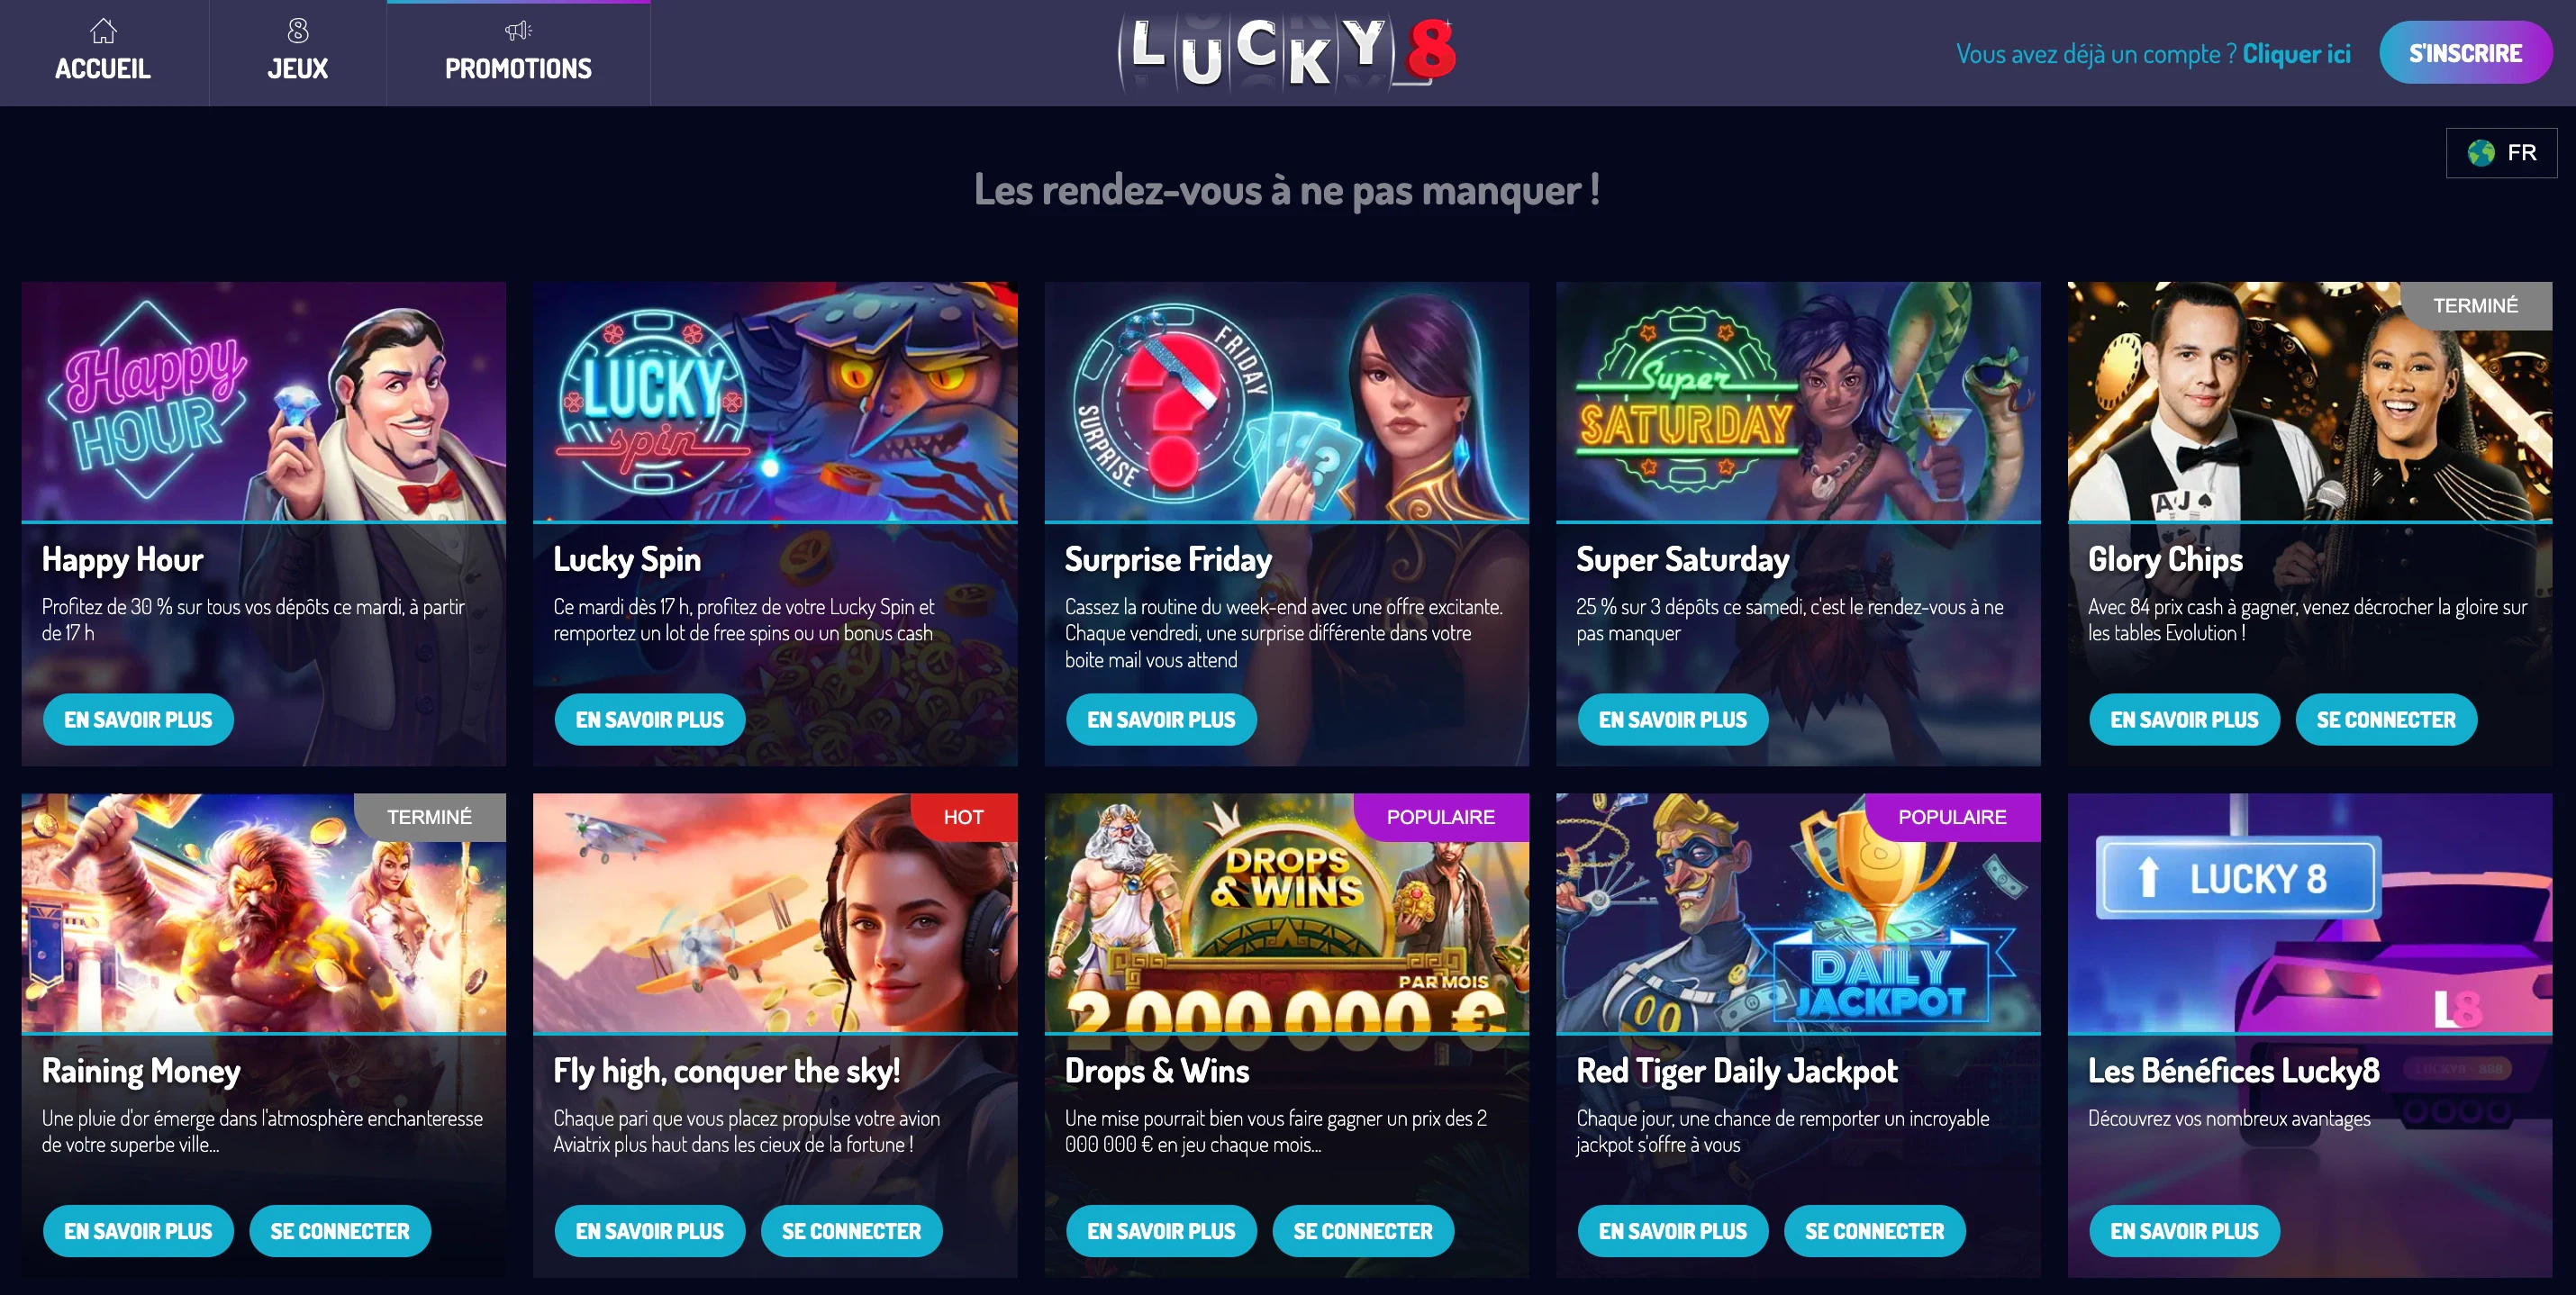 promotions lucky8